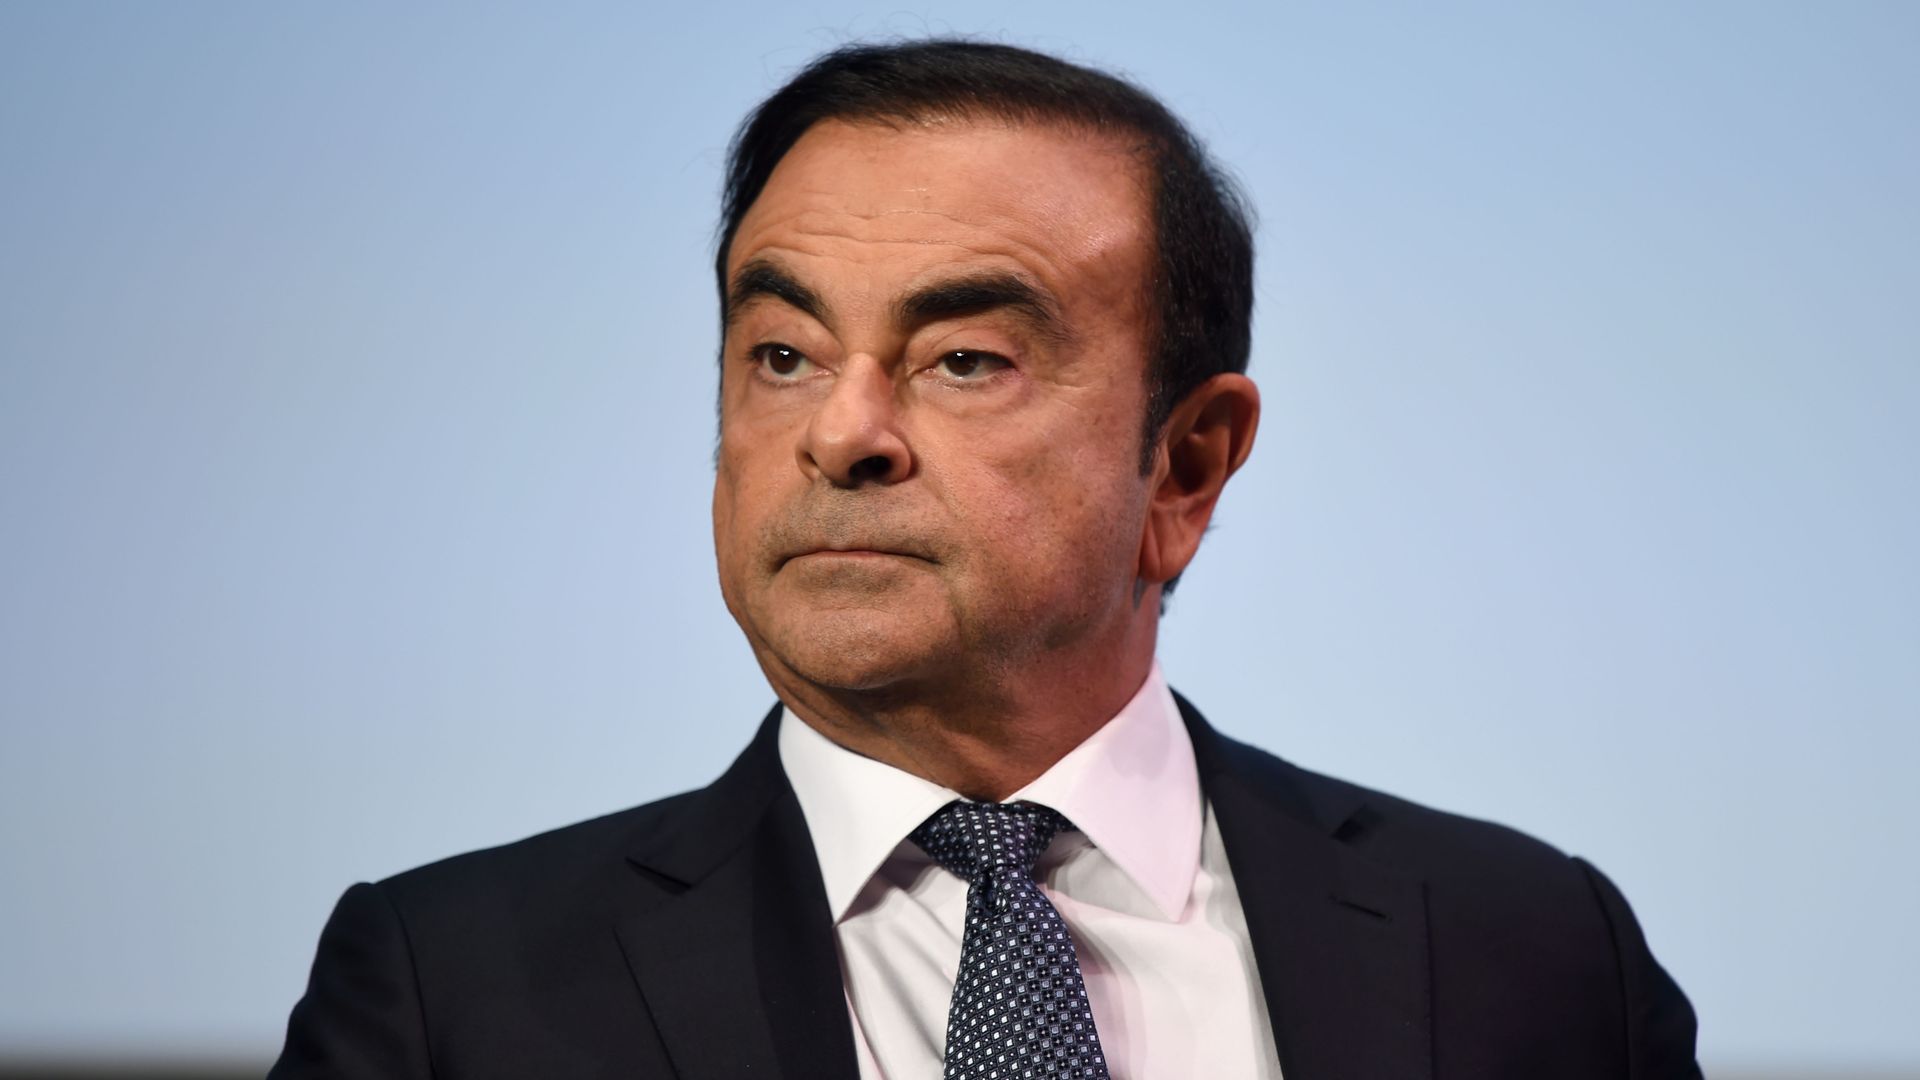 Carlos Ghosn has been charged with financial misconduct.